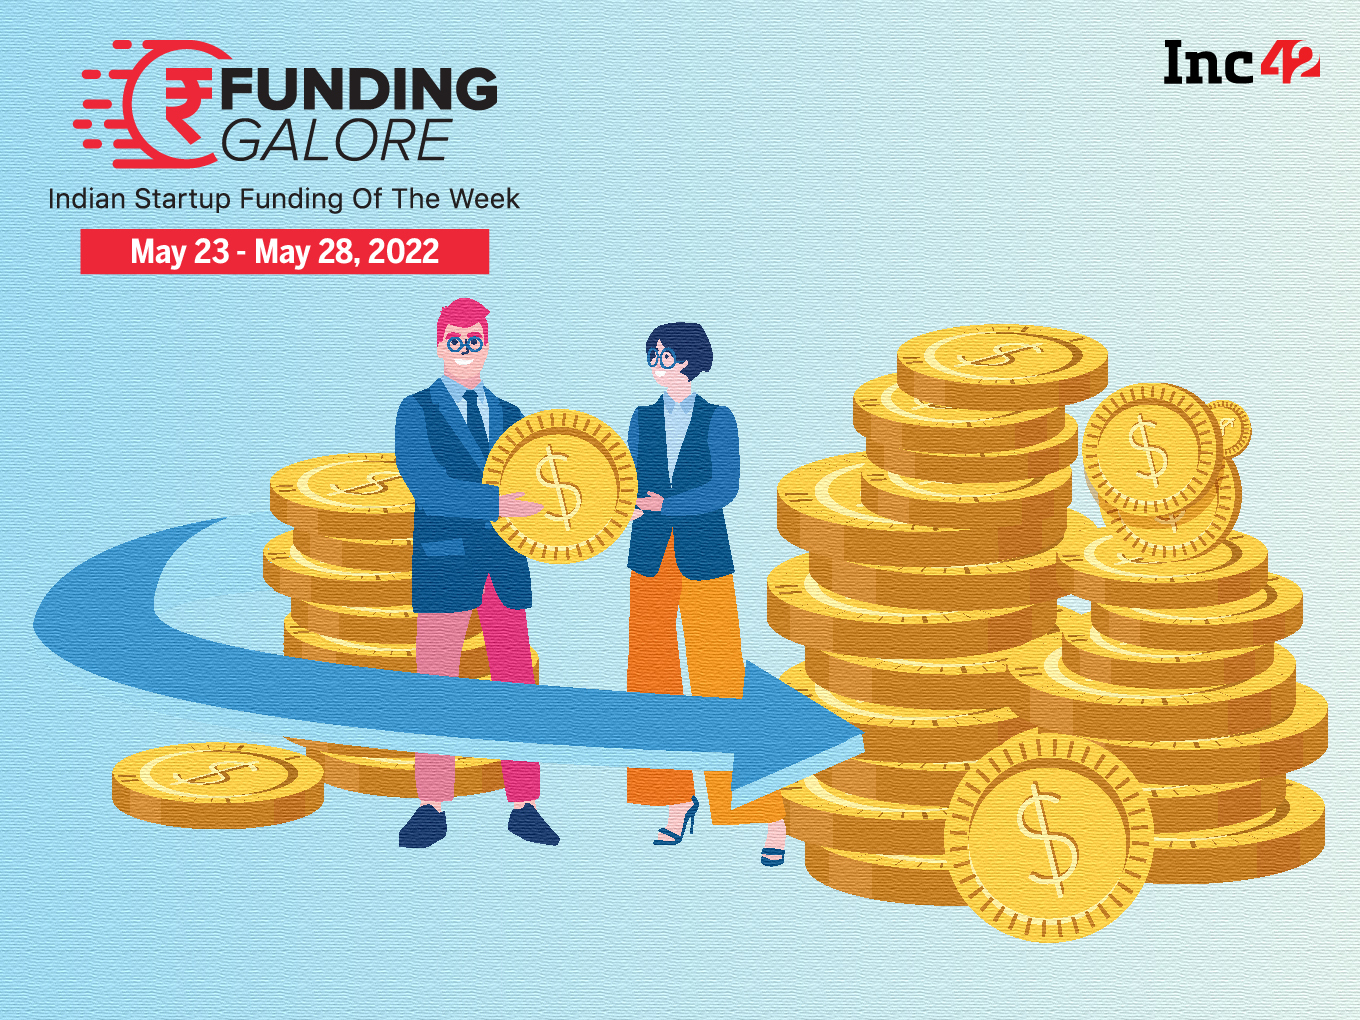 [Funding Galore] From Country Delight To BluSmart — $258 Mn Raised By Indian Startups This Week